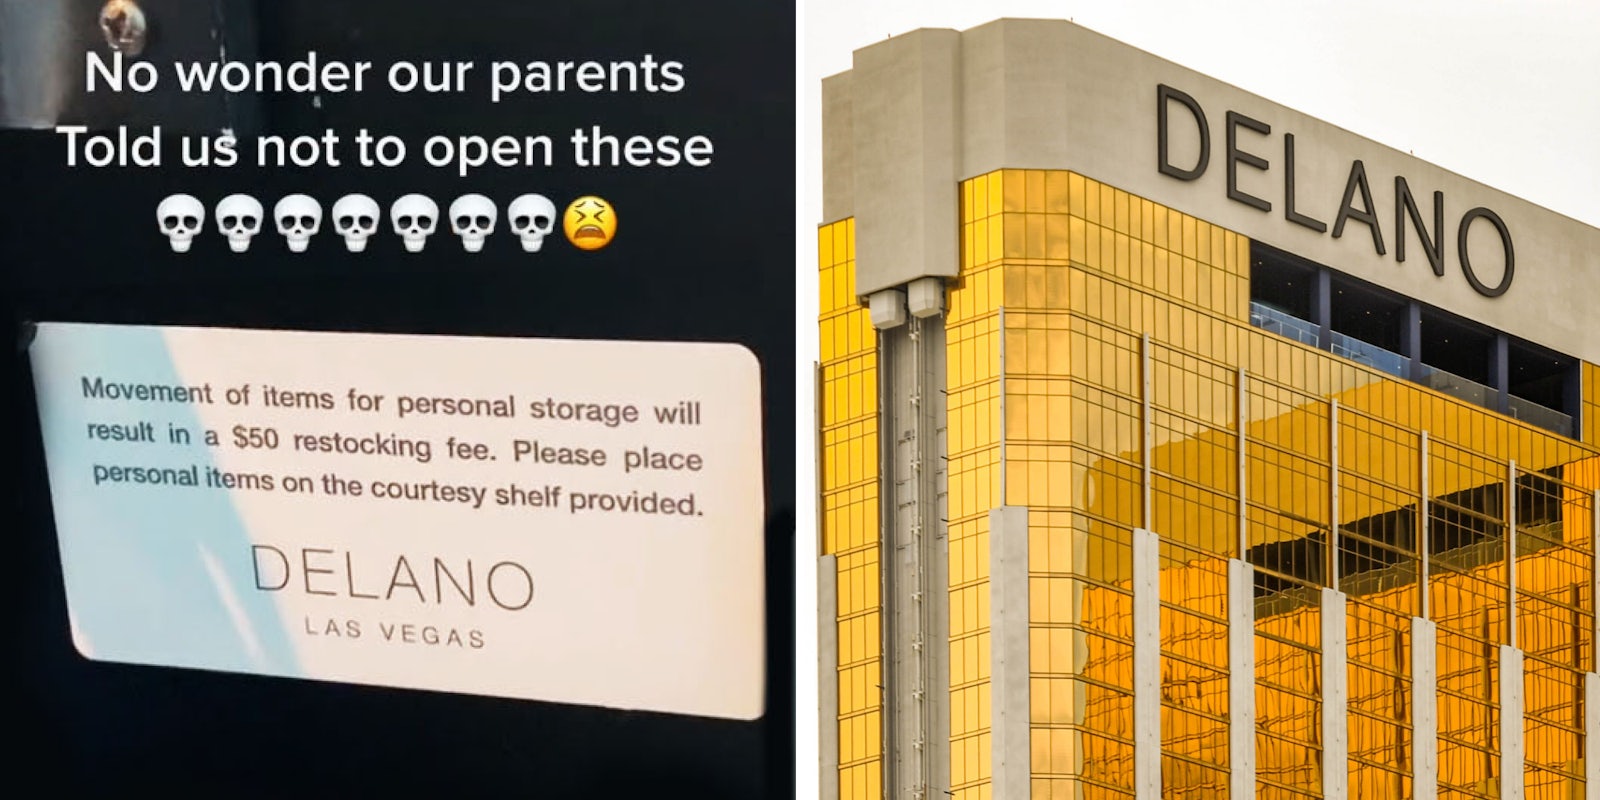 Fridge door sign up close caption 'Movement of items for personal storage will result in a $50 stocking fee. Please place personal items on the courtesy shelf provided DELANO LAS VEGAS' 'No wonder our parents told us not to open these' (l) DELANO Las Vegas building (r)